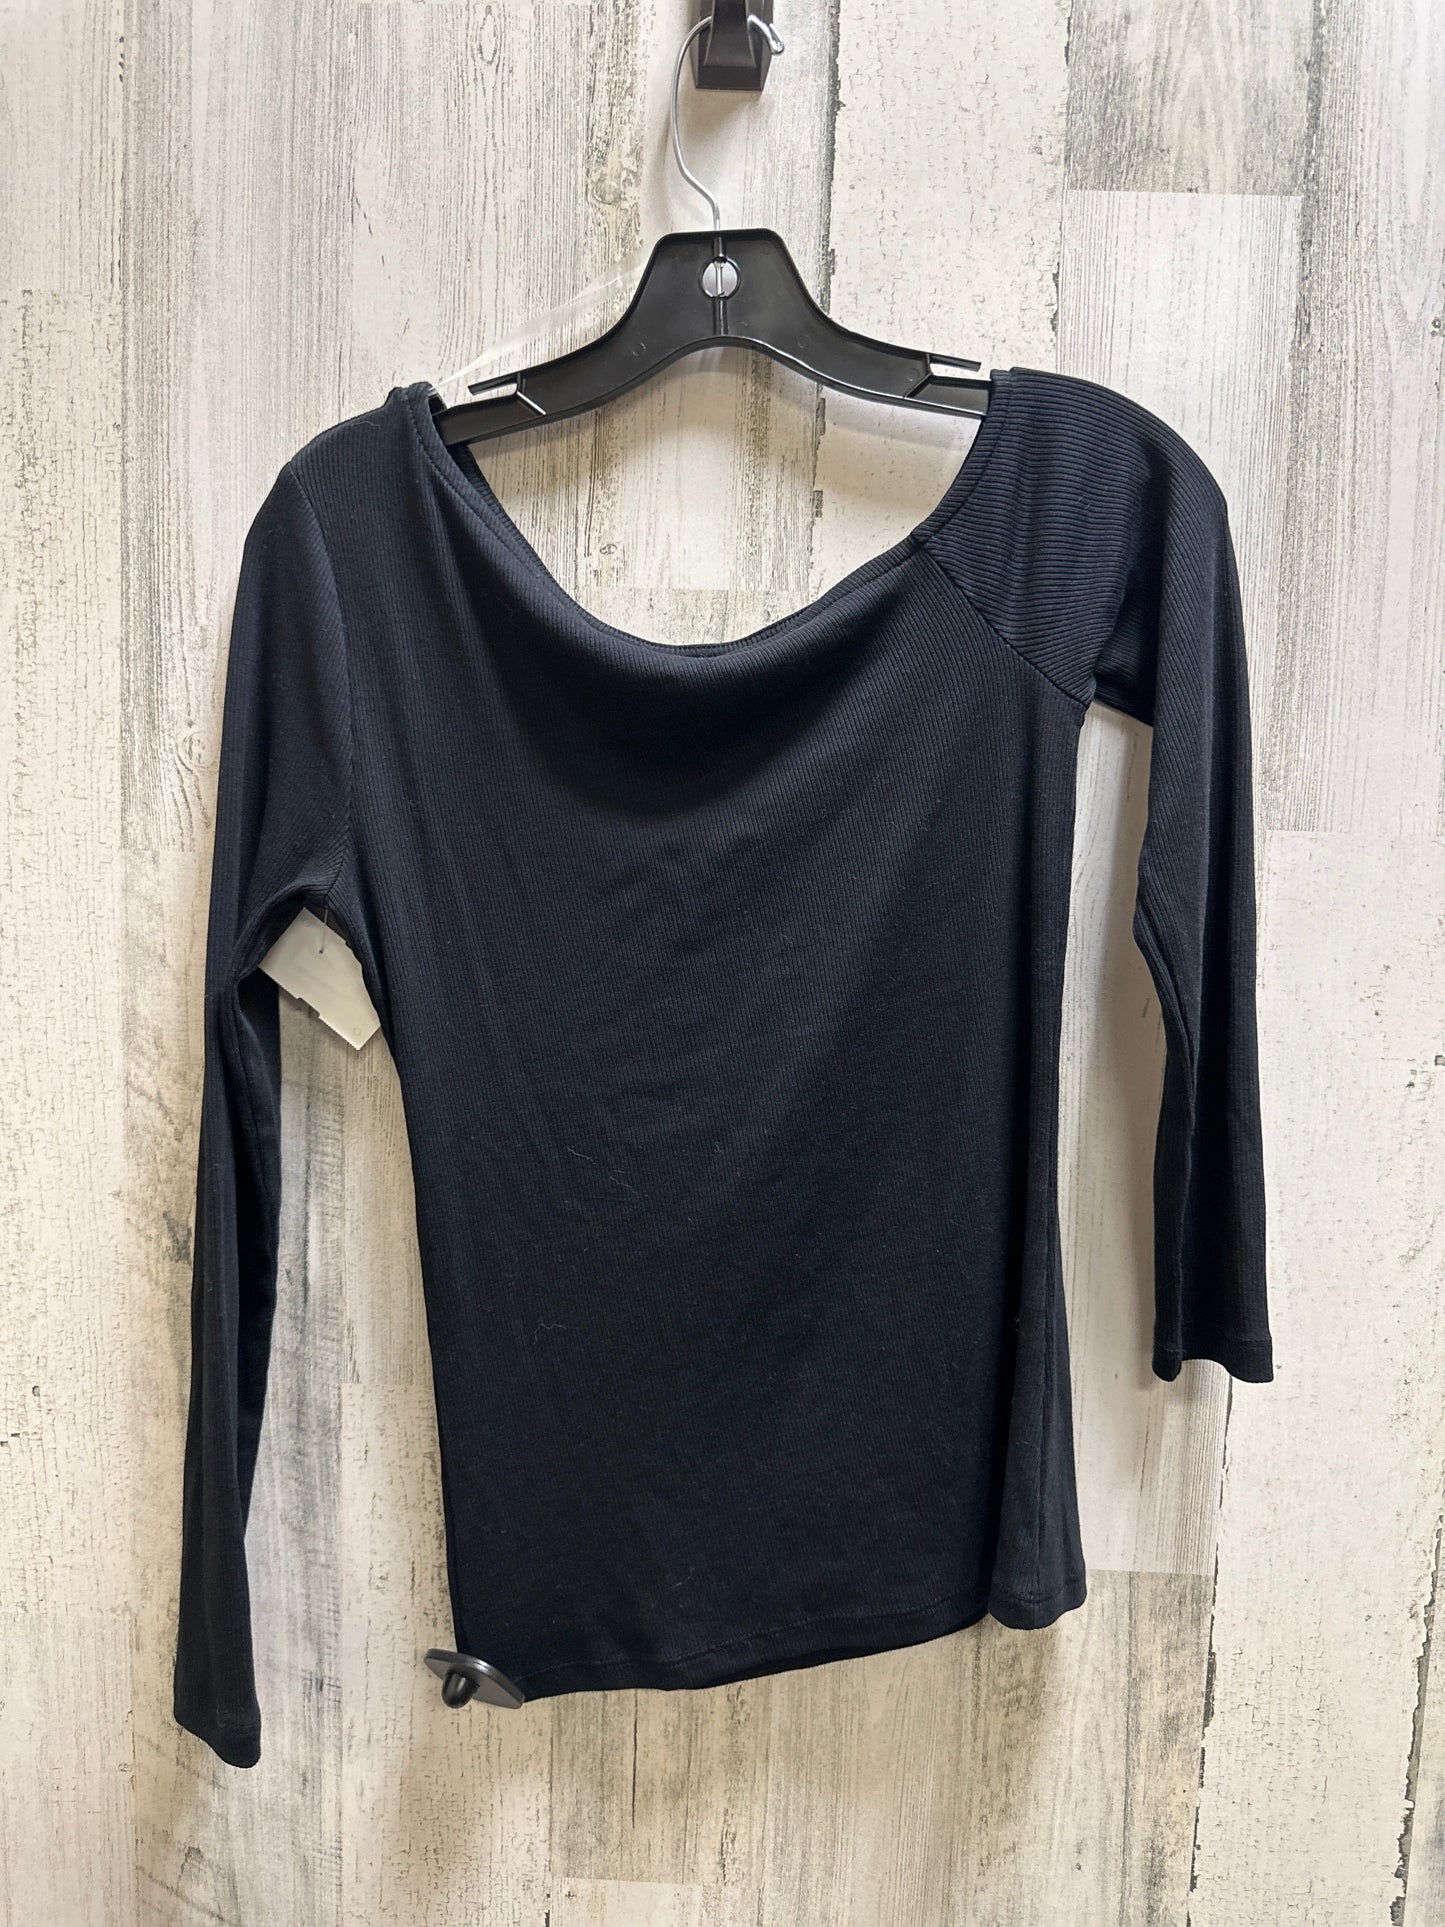 Black Top Long Sleeve Basic A New Day, Size Xs